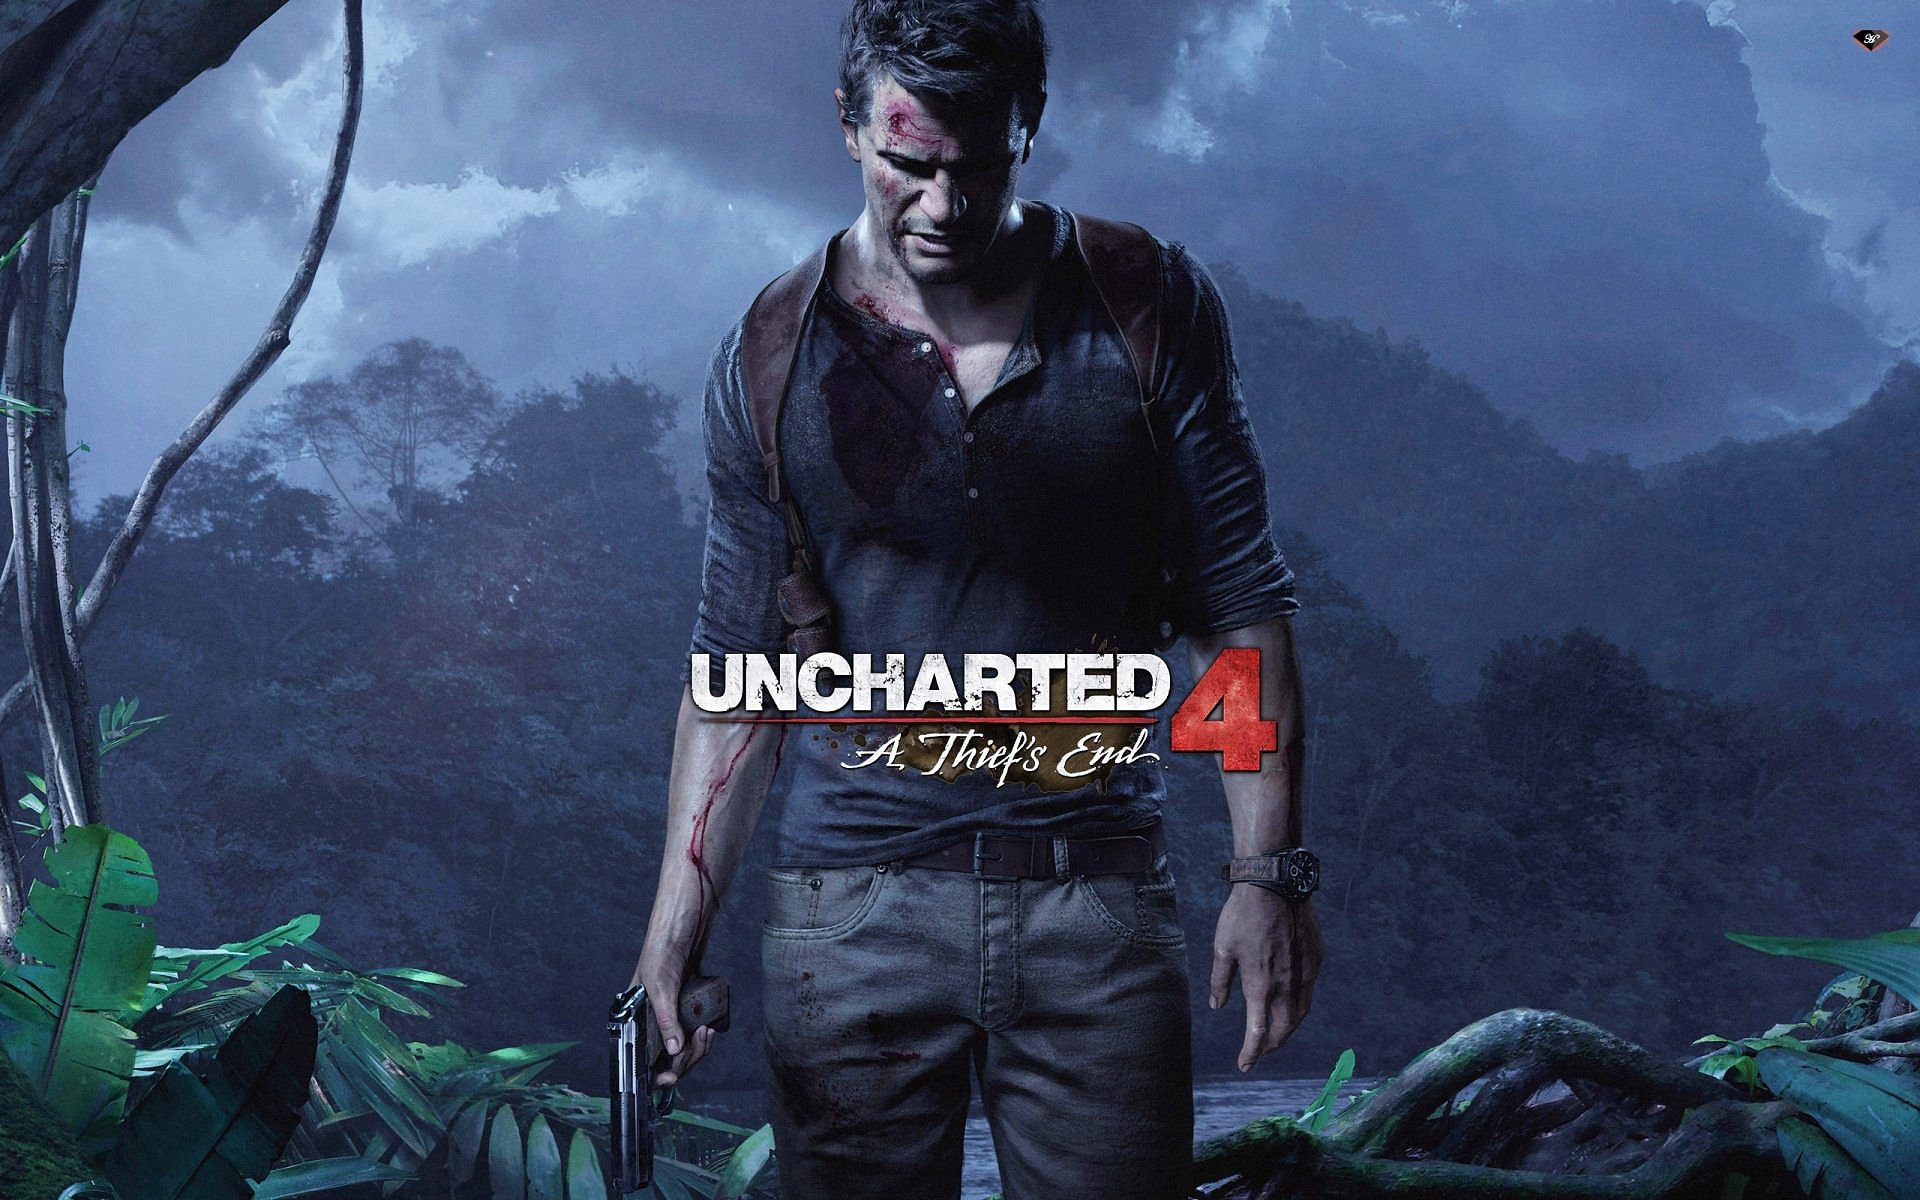 naughty-dog-states-uncharted-4-a-thief-s-end-will-have-more-realistic-visuals